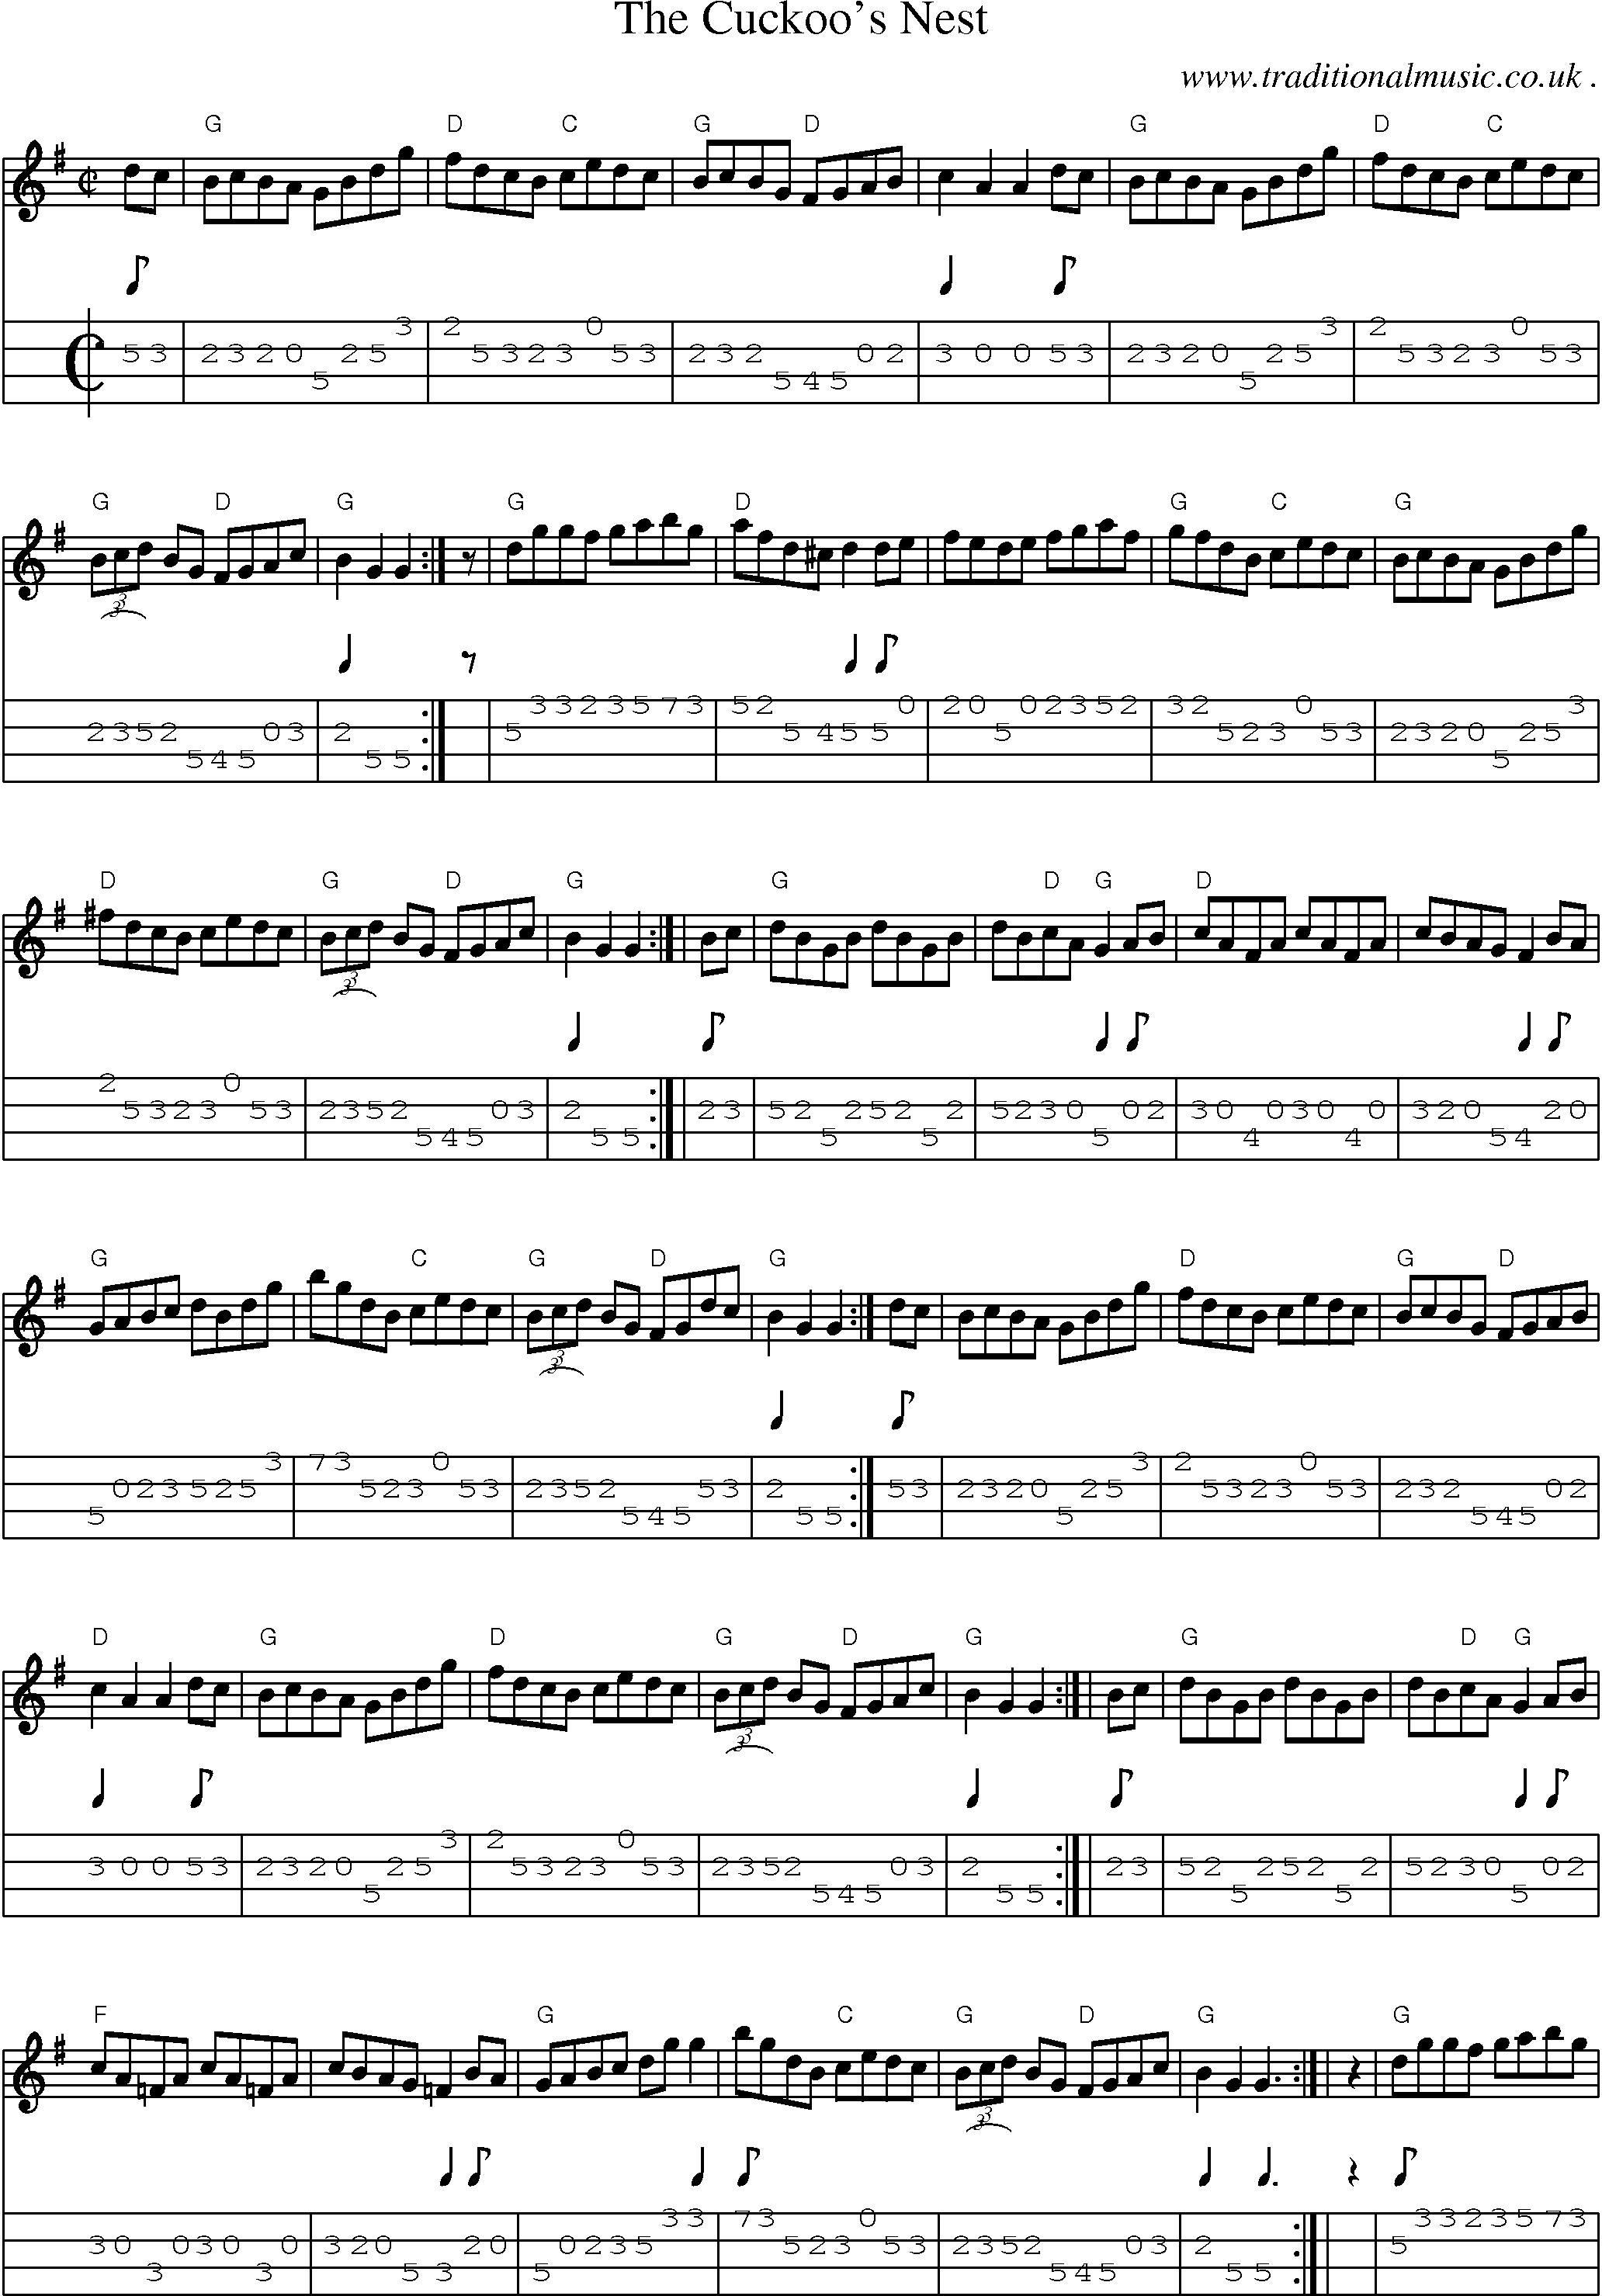 Music Score and Guitar Tabs for The Cuckoos Nest